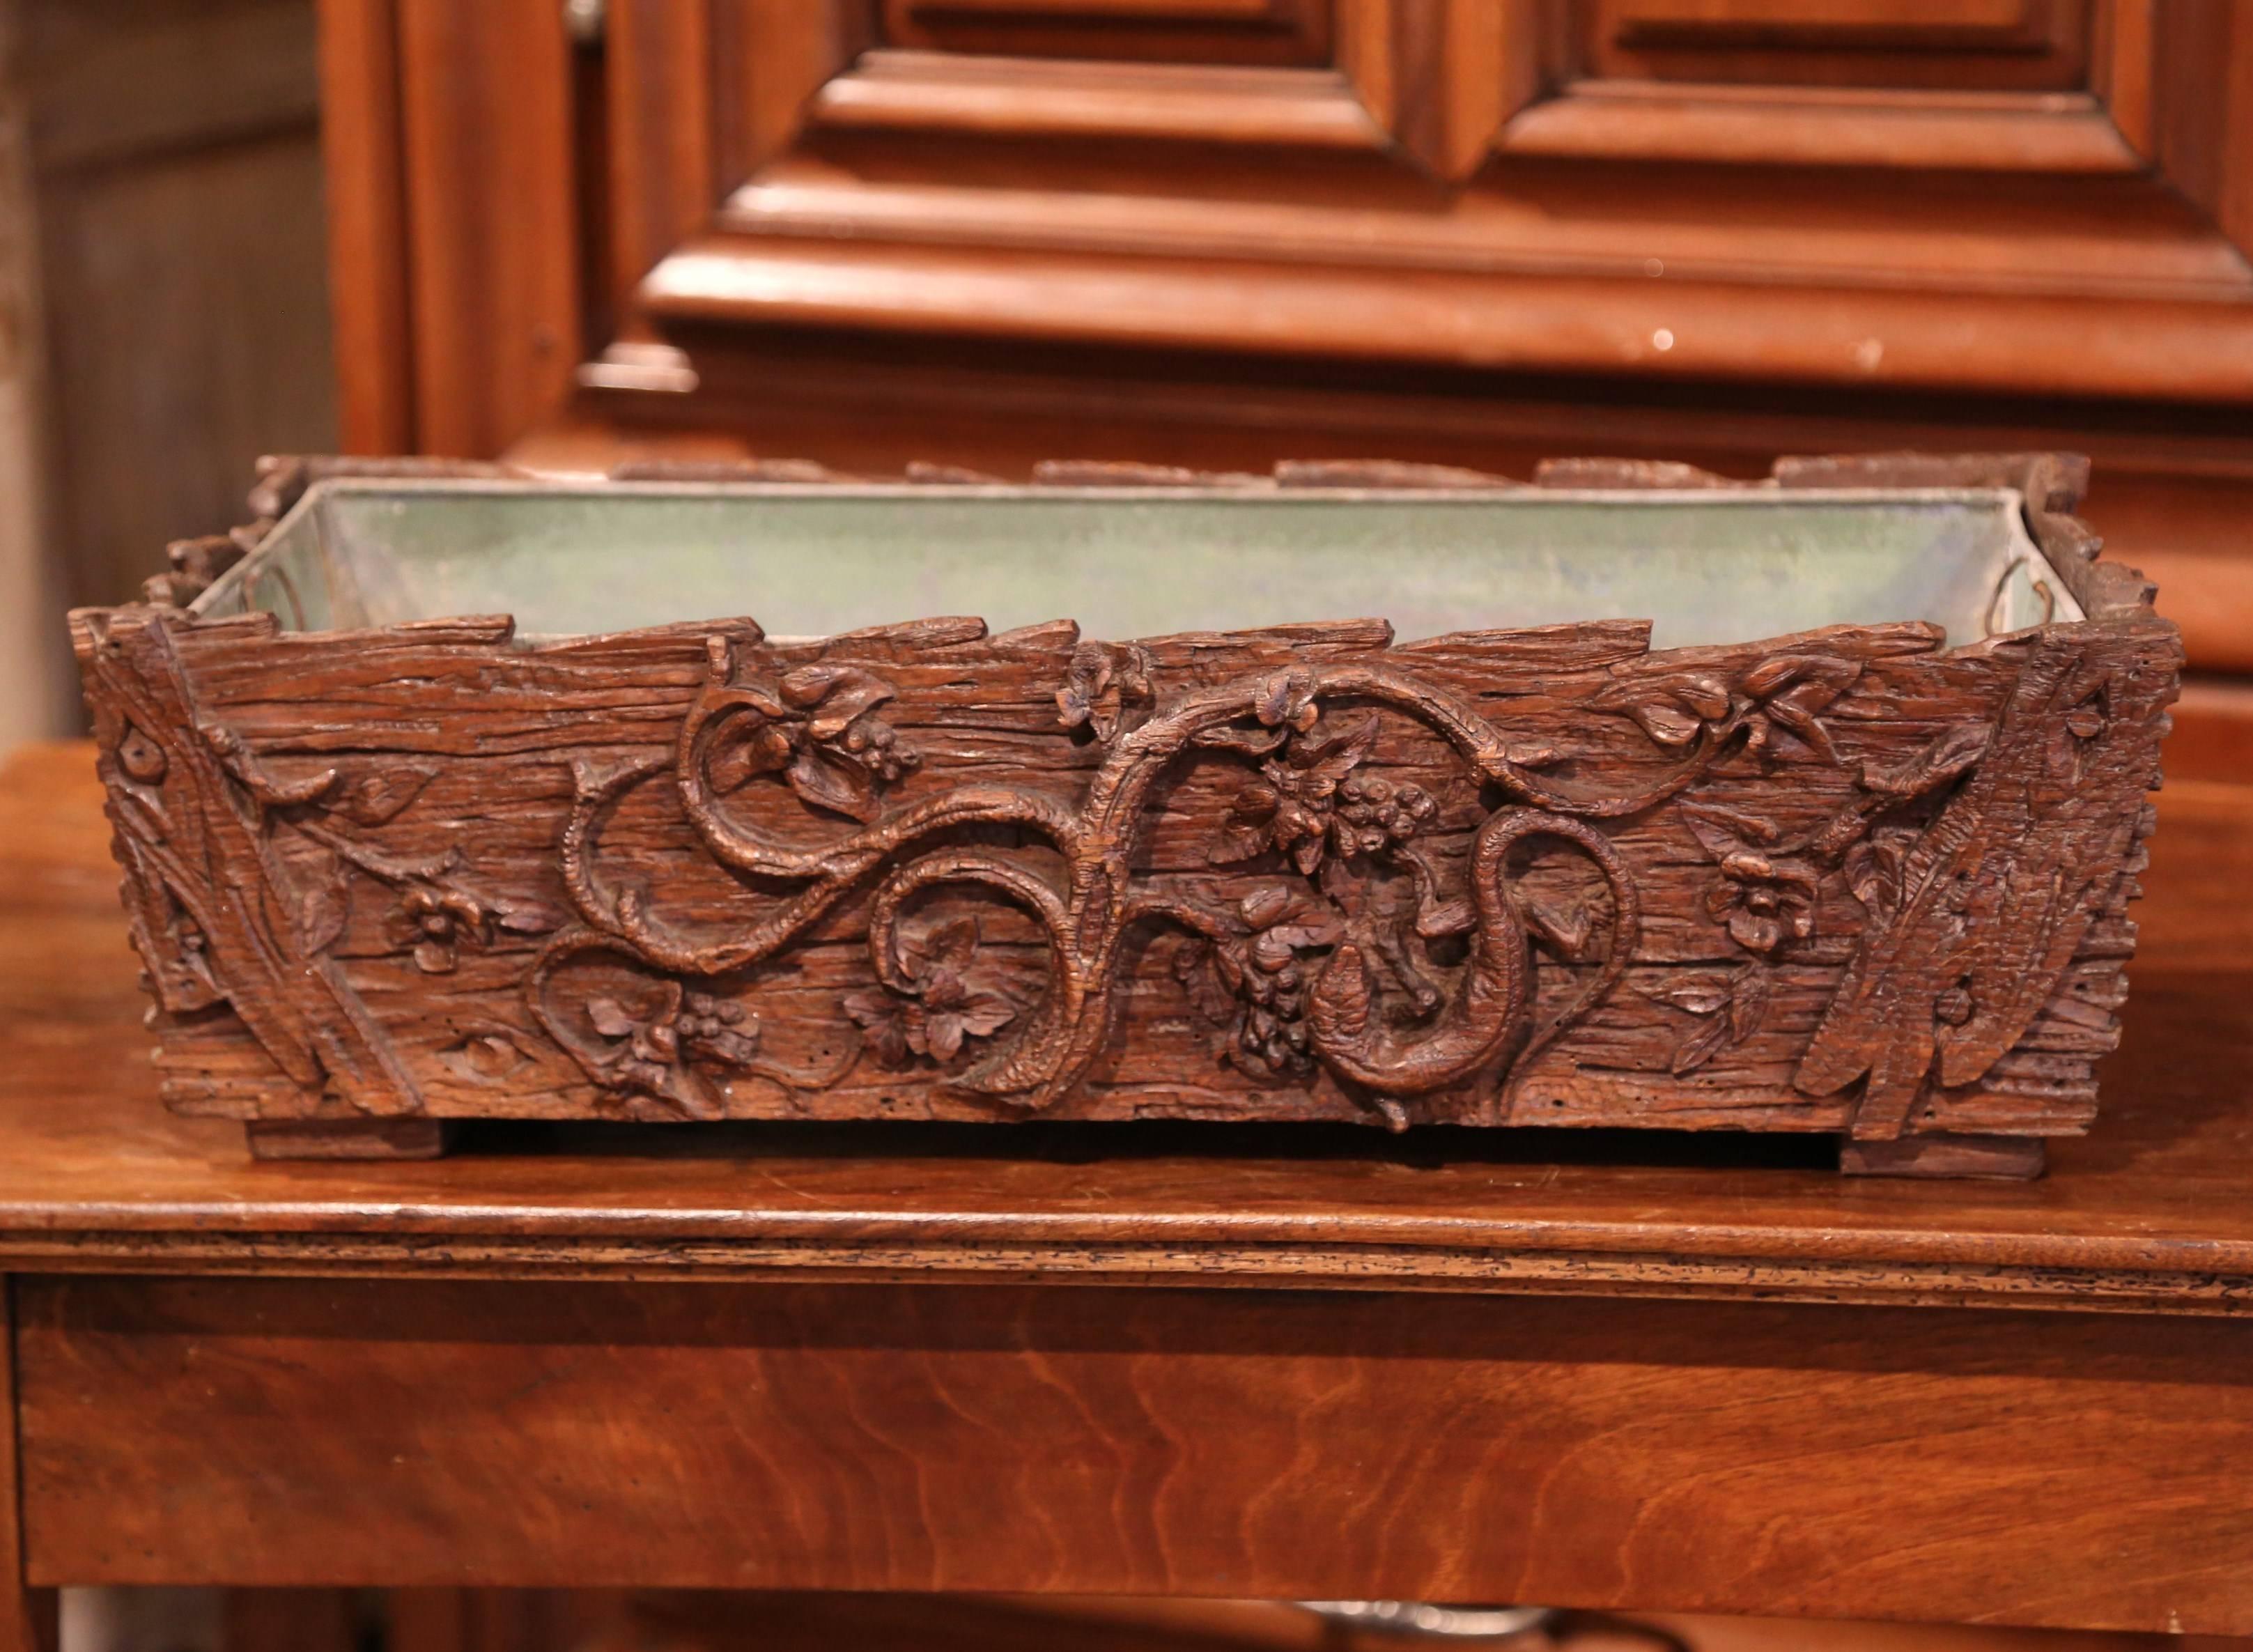 This beautiful, walnut, Black Forest jardinière carved as a wooden log was crafted in France, circa 1870. The rectangular fruitwood planter features hand carved floral, tree branches with leaf decor. The antique planter is in excellent condition,